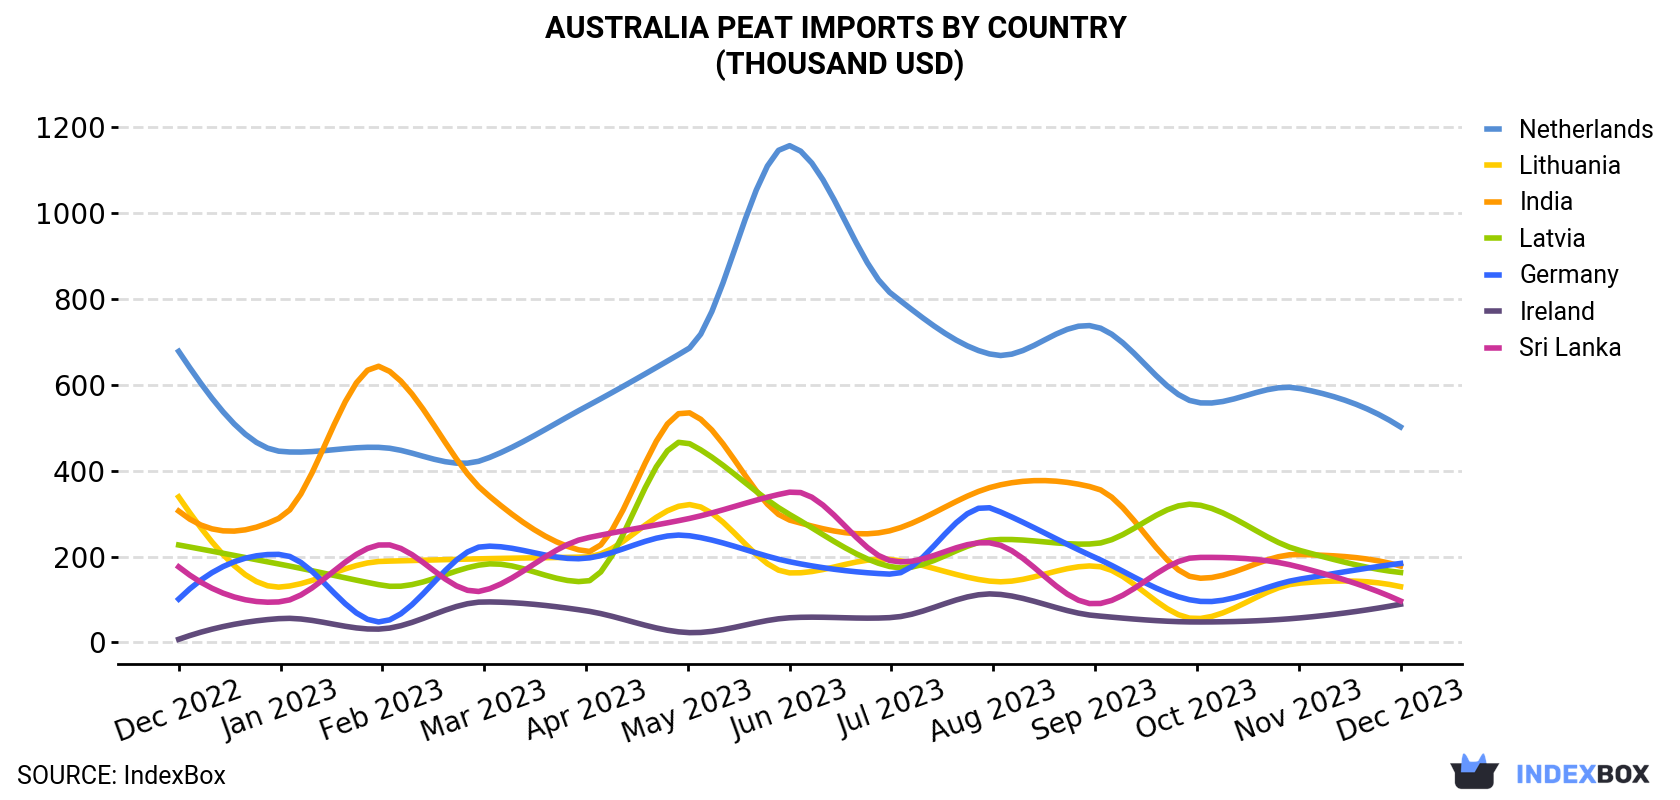 Australia Peat Imports By Country (Thousand USD)